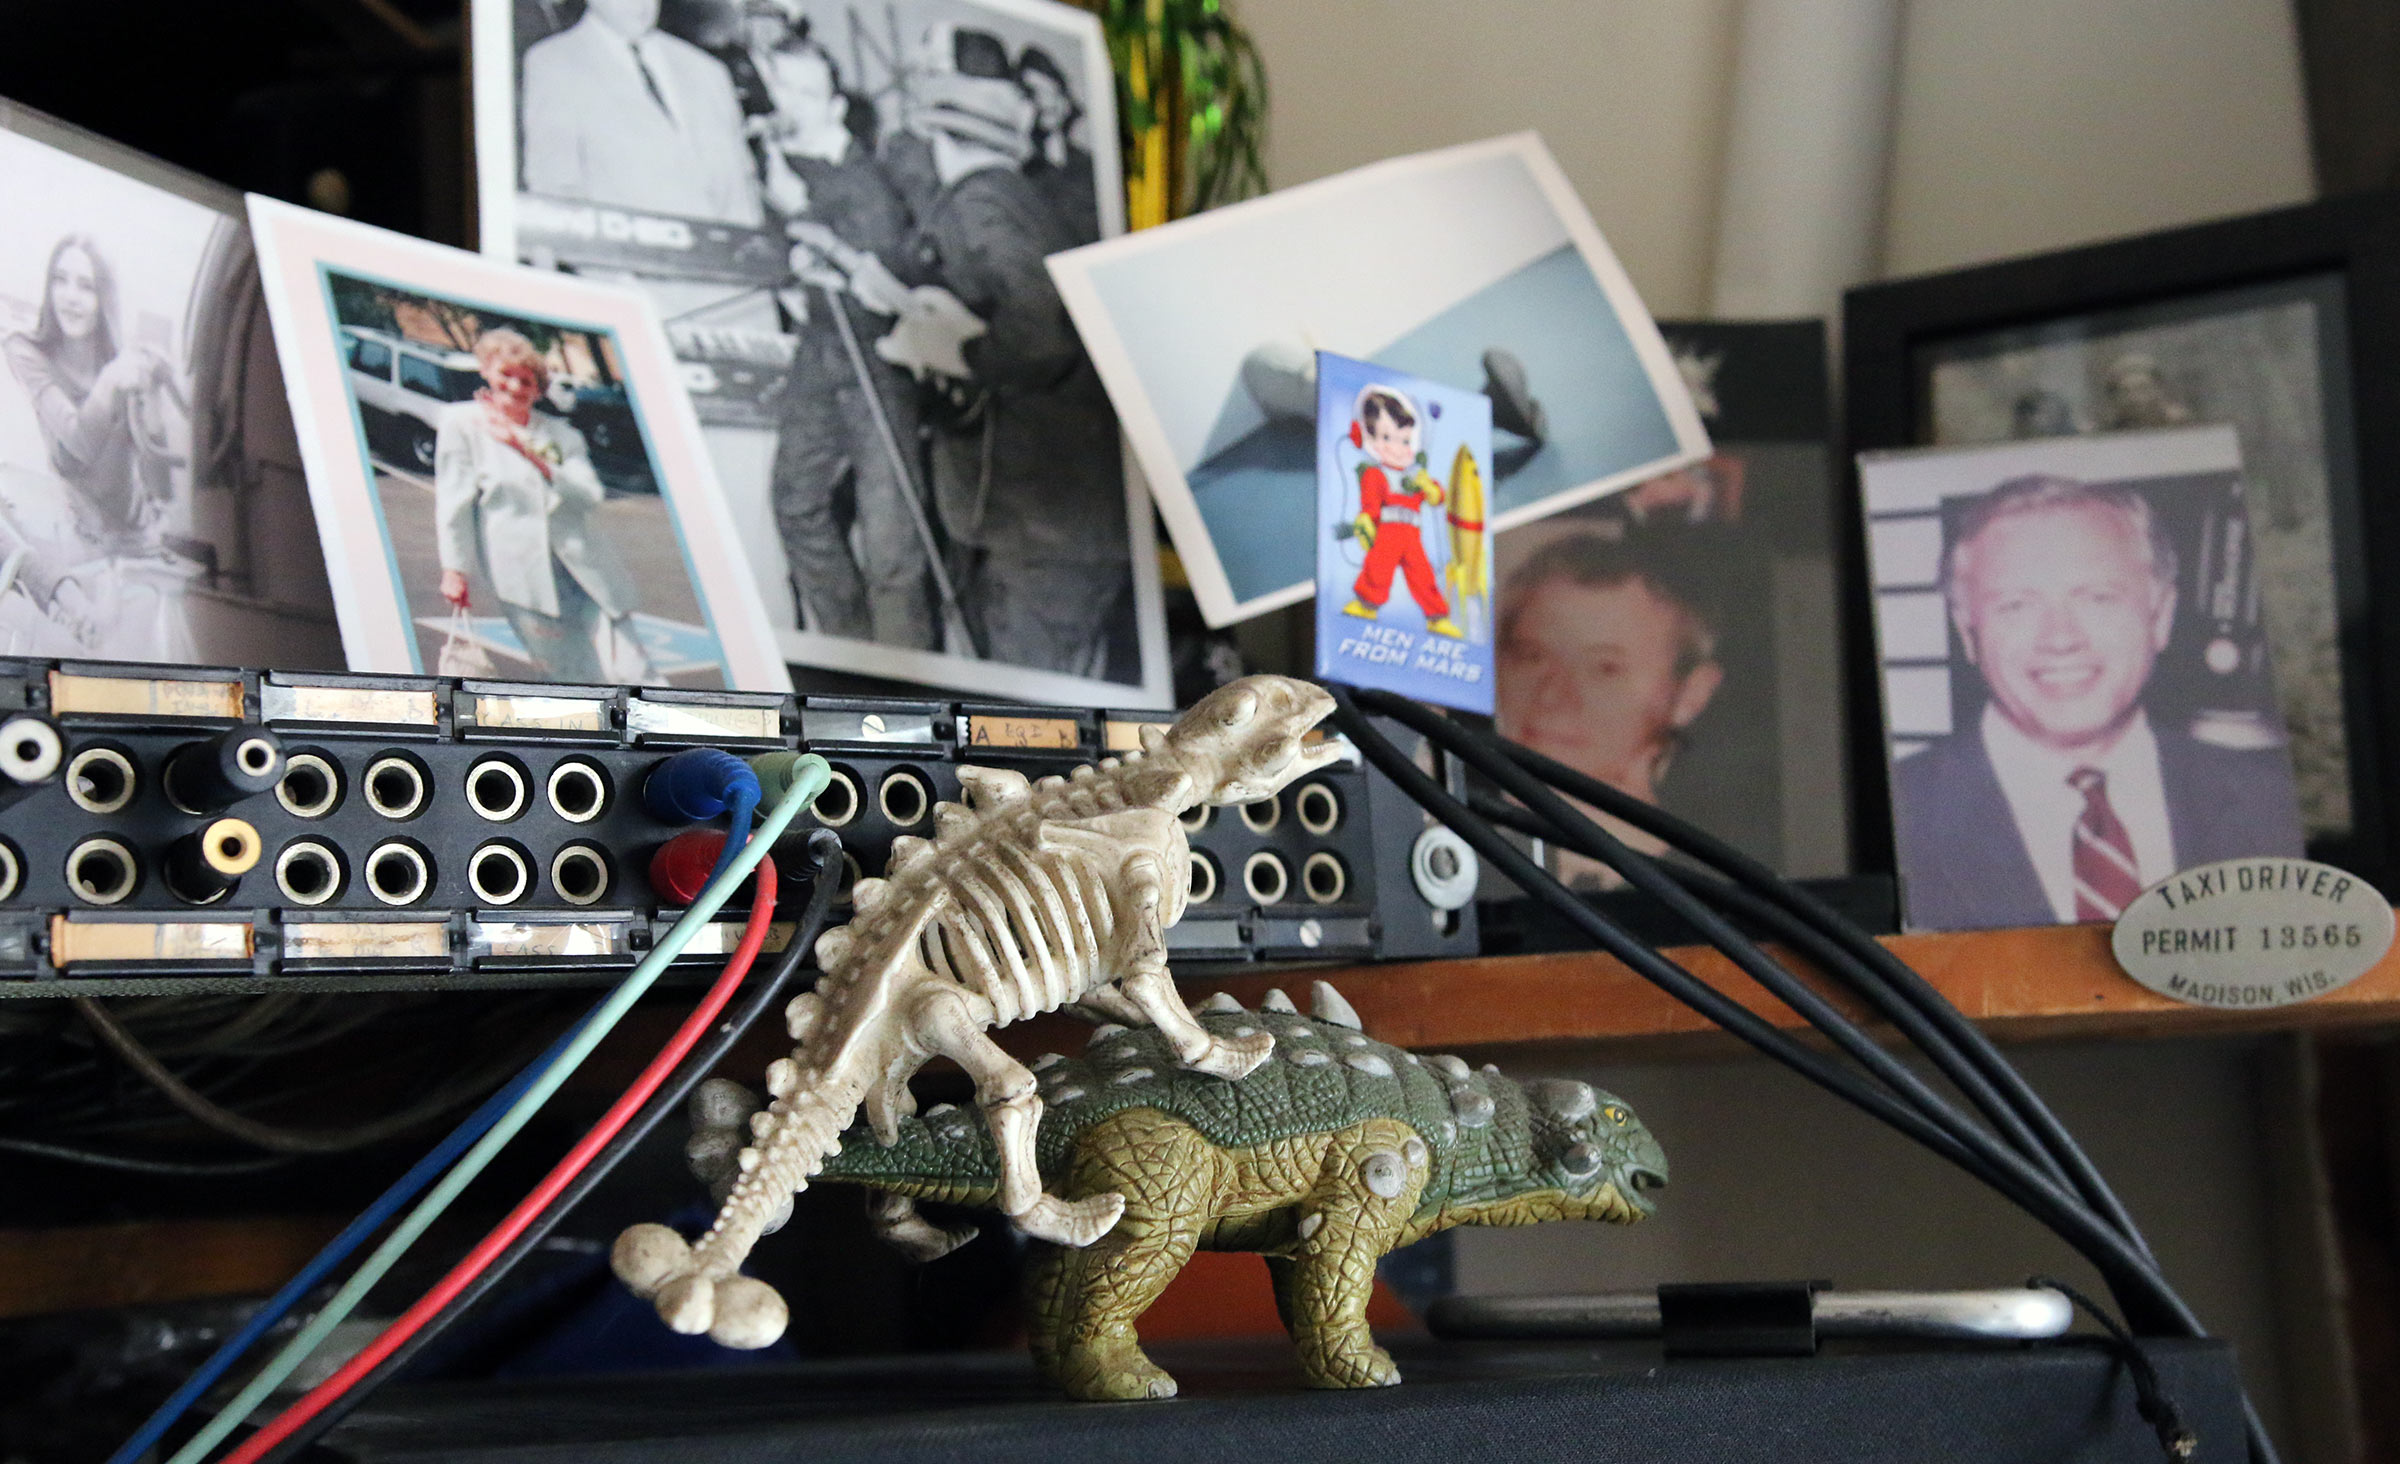 A couple of plastic dinosaurs and old photos surrounding some of Scott Johnson's electric keyboards.